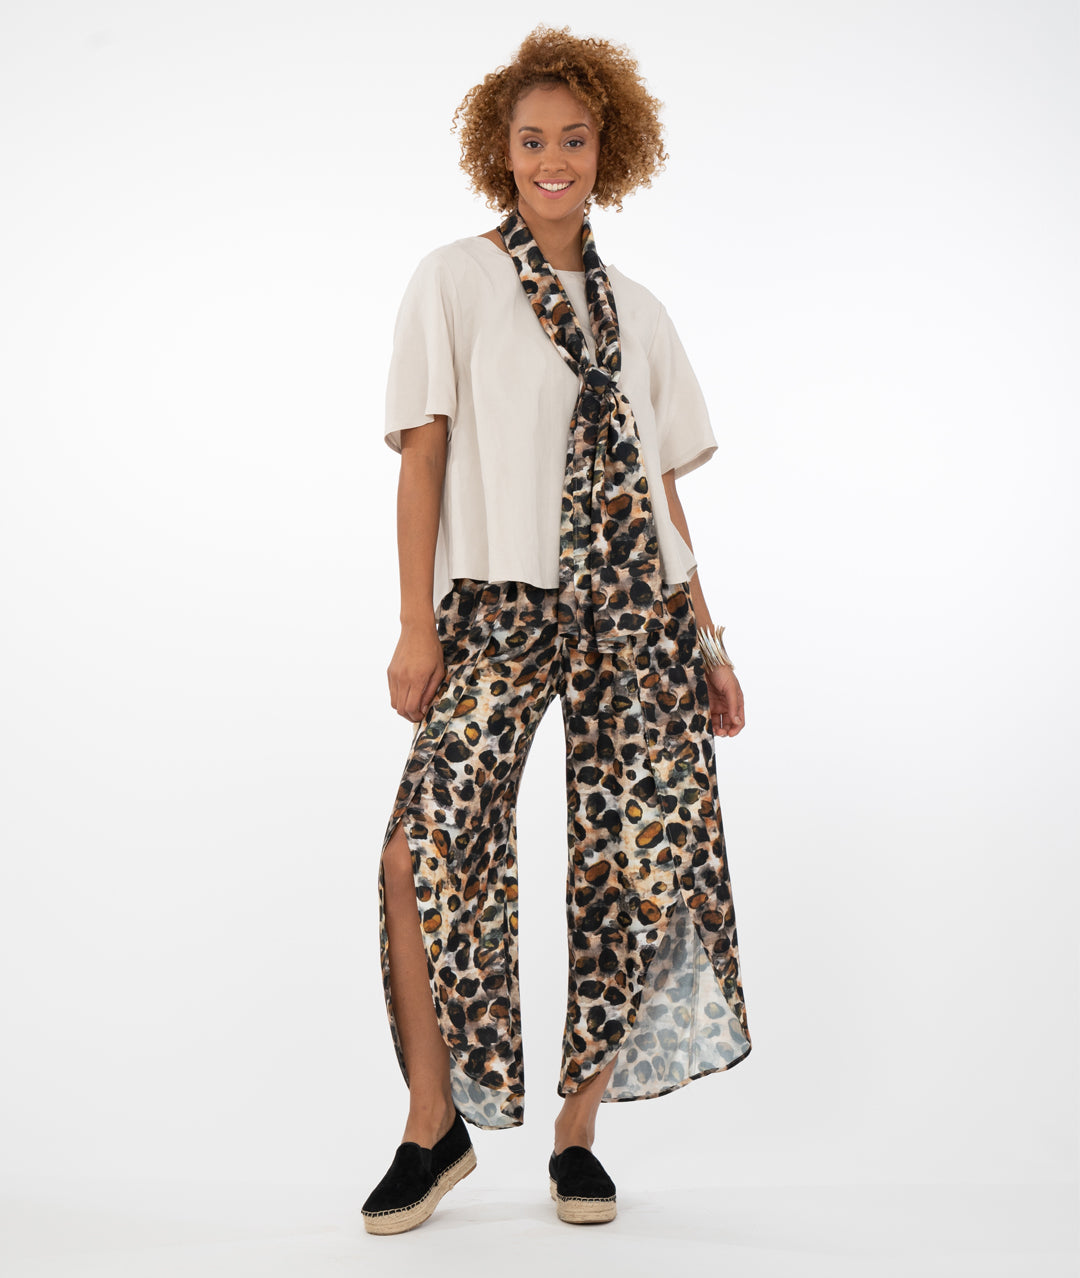 model in a bone colored top with animal print pants and scarf, in front of a white background